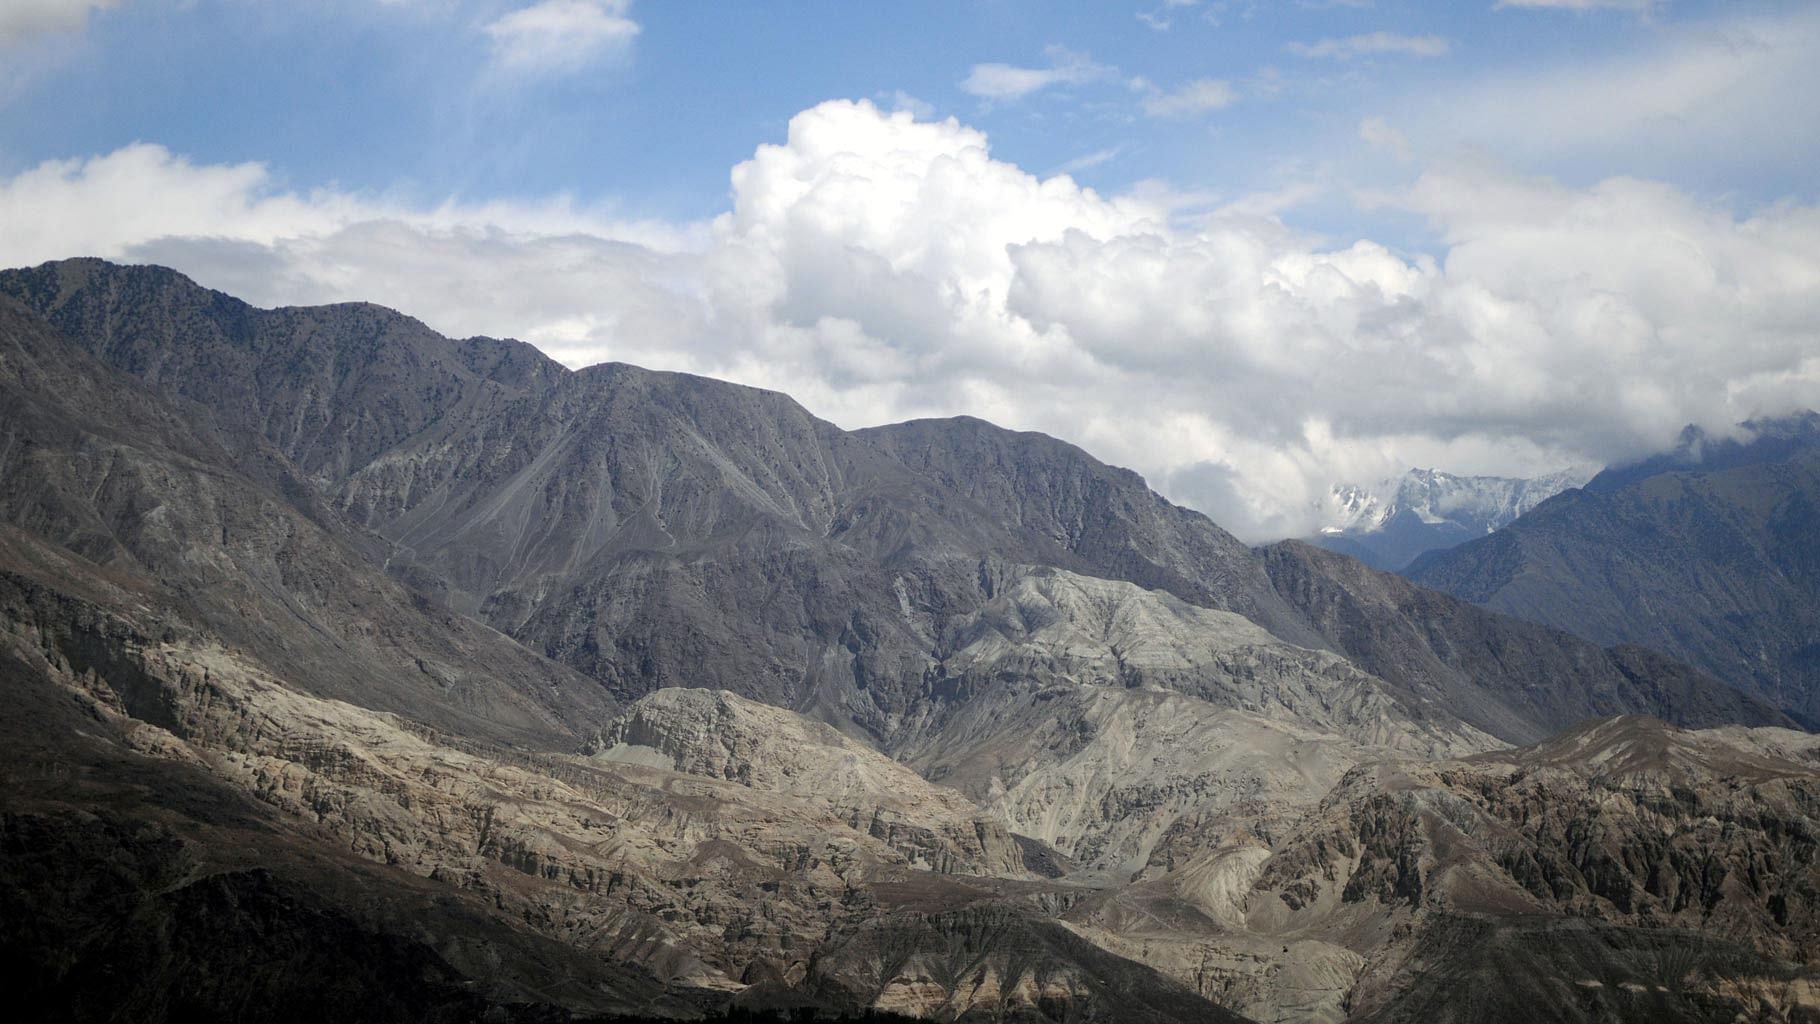 View of Karakoram mountain range in Gilgit, Pakistan. Sovereignty and any constitutional status in Pakistan have remained vague and elusive for this Shia-dominated region&nbsp; (Photo: IANS)